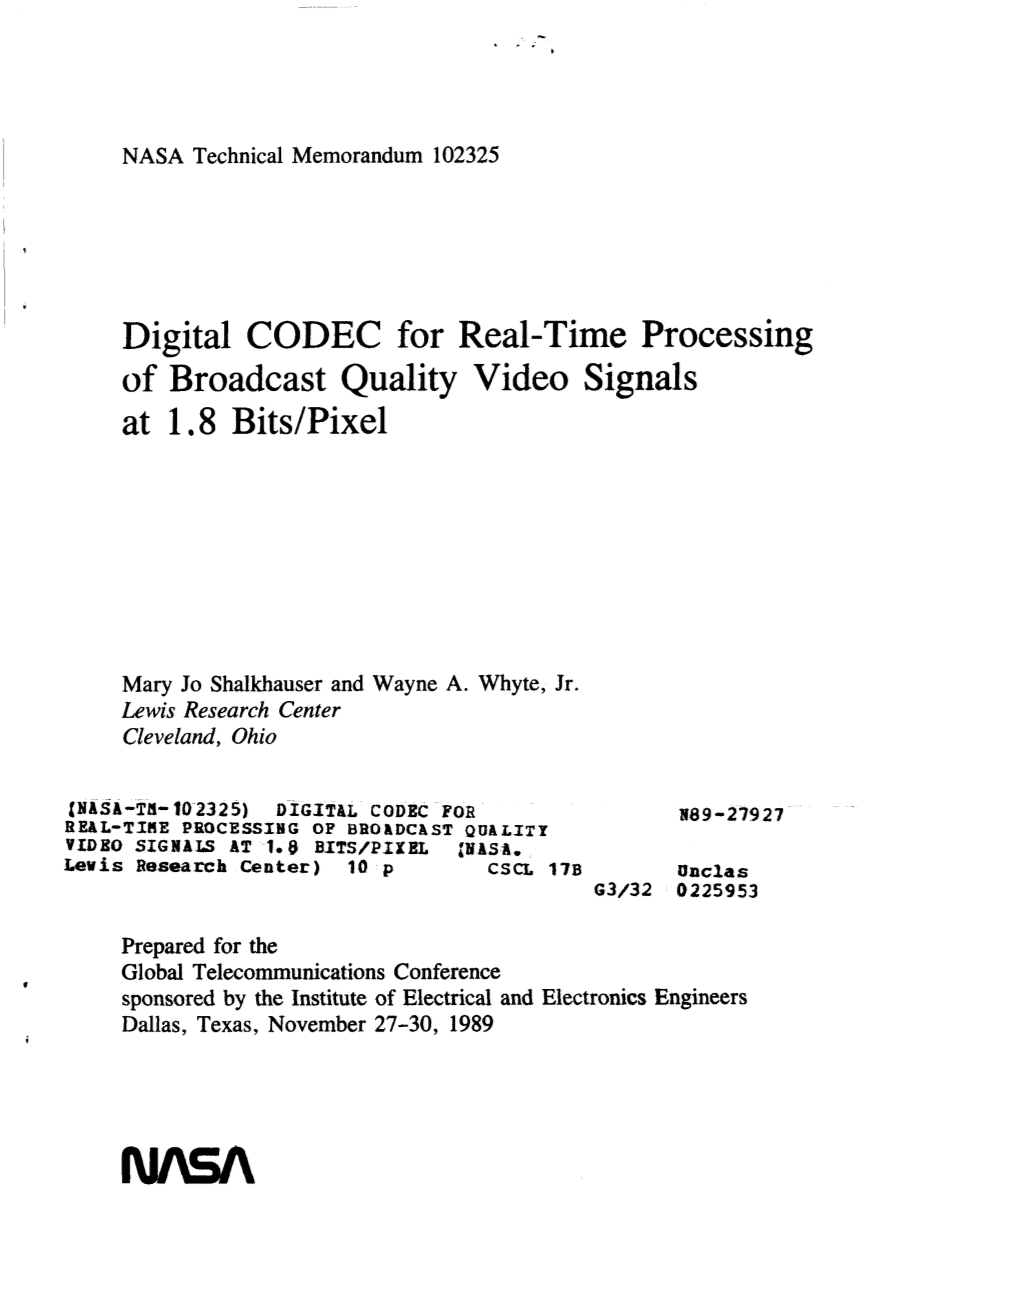 Digital CODEC for Real-Time Processing of Broadcast Quality Video Signals at 1 8 Bits/Pixel